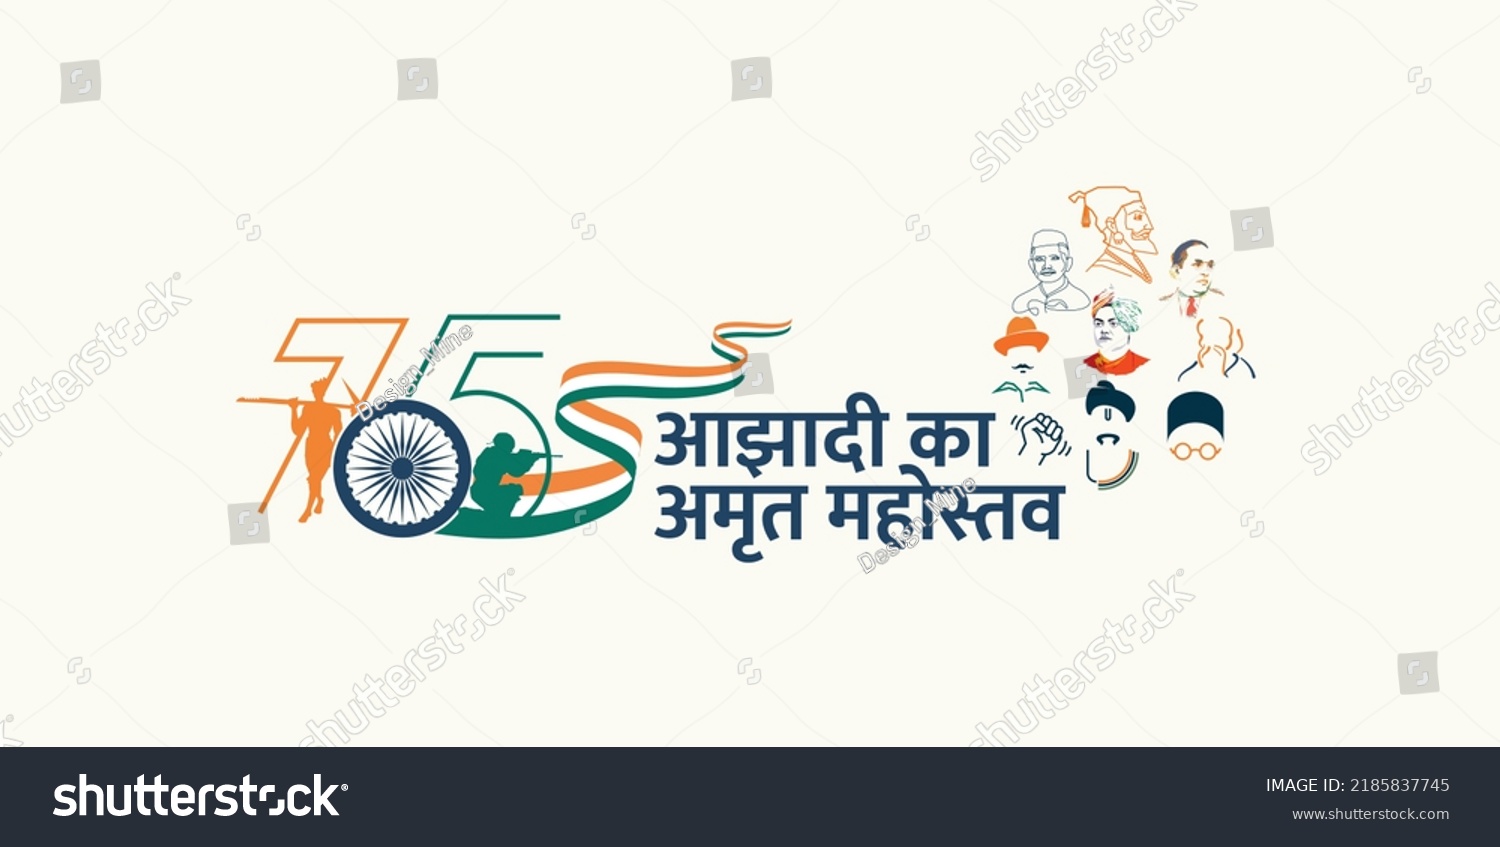 SVG of New Delhi-India, August 15, 2022: 75 Year Anniversary Independence Day Logo. Azadi Ka Amrit Mahotsav (Translate: Elixir of Independence Energy). Illustration of freedom fighters and Legends of India svg